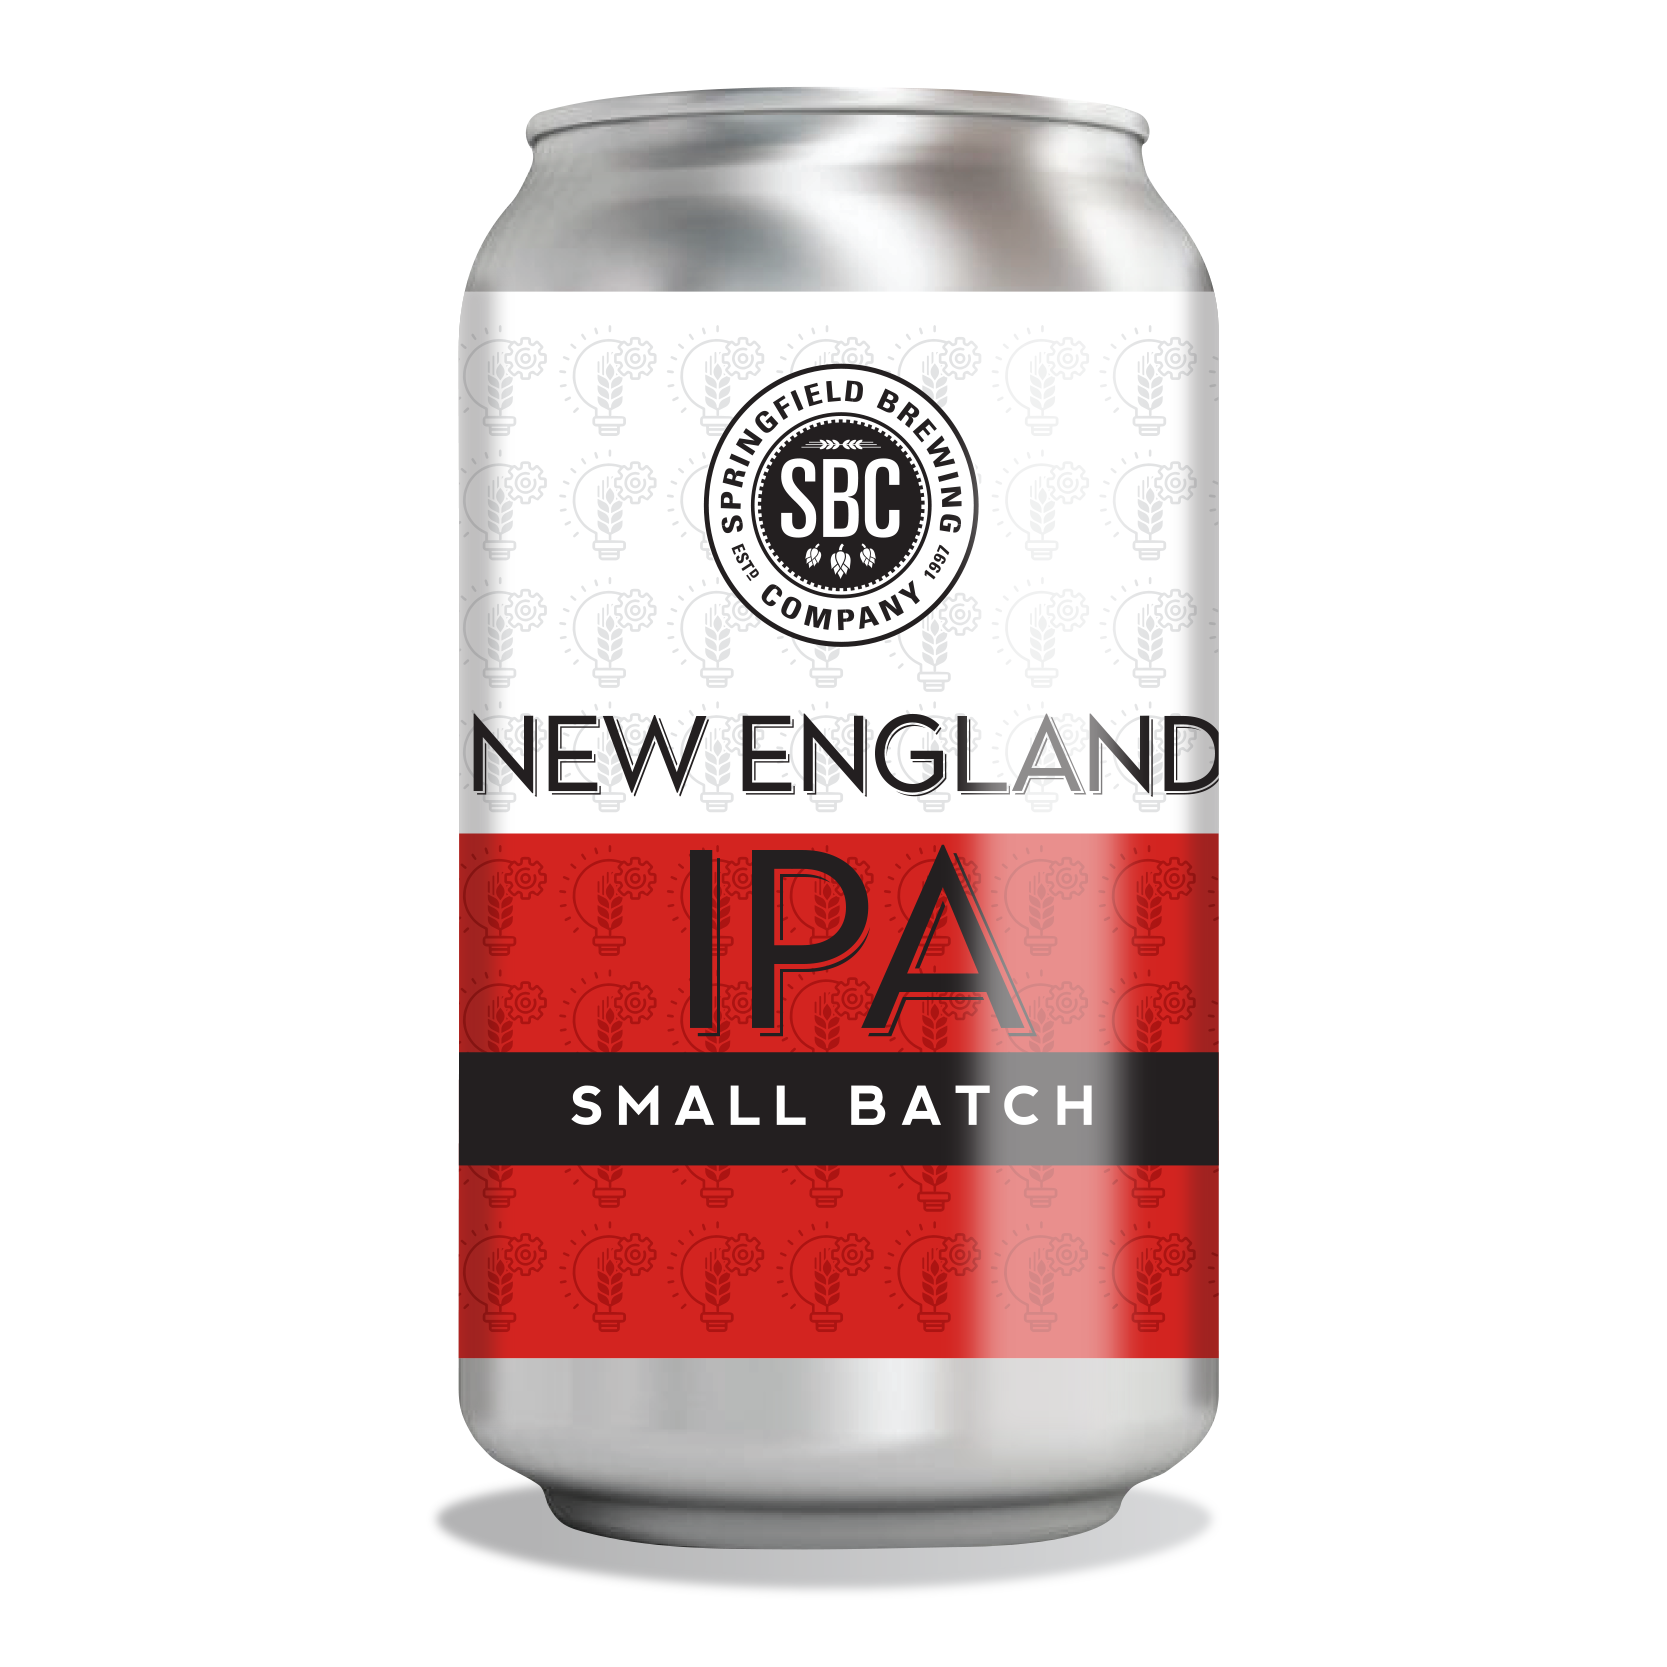 https://brewery.springfieldbrewingco.com/wp-content/uploads/2022/08/NewEnglandIPA_CanWebsite.png